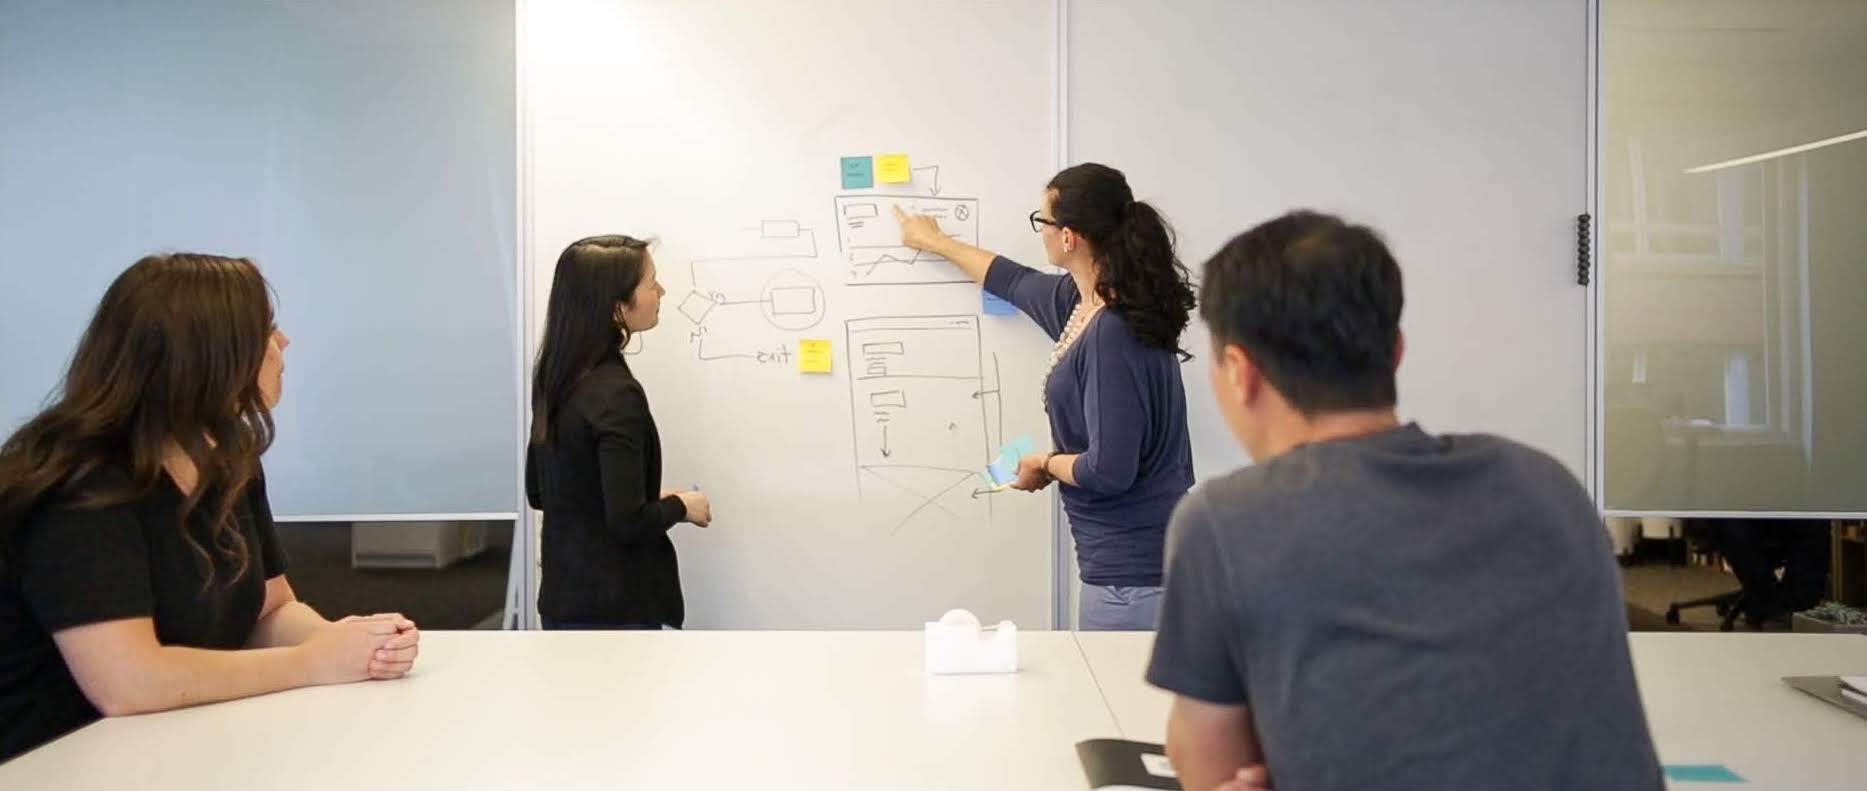 UX professionals discussing a diagram drawn on a whiteboard.